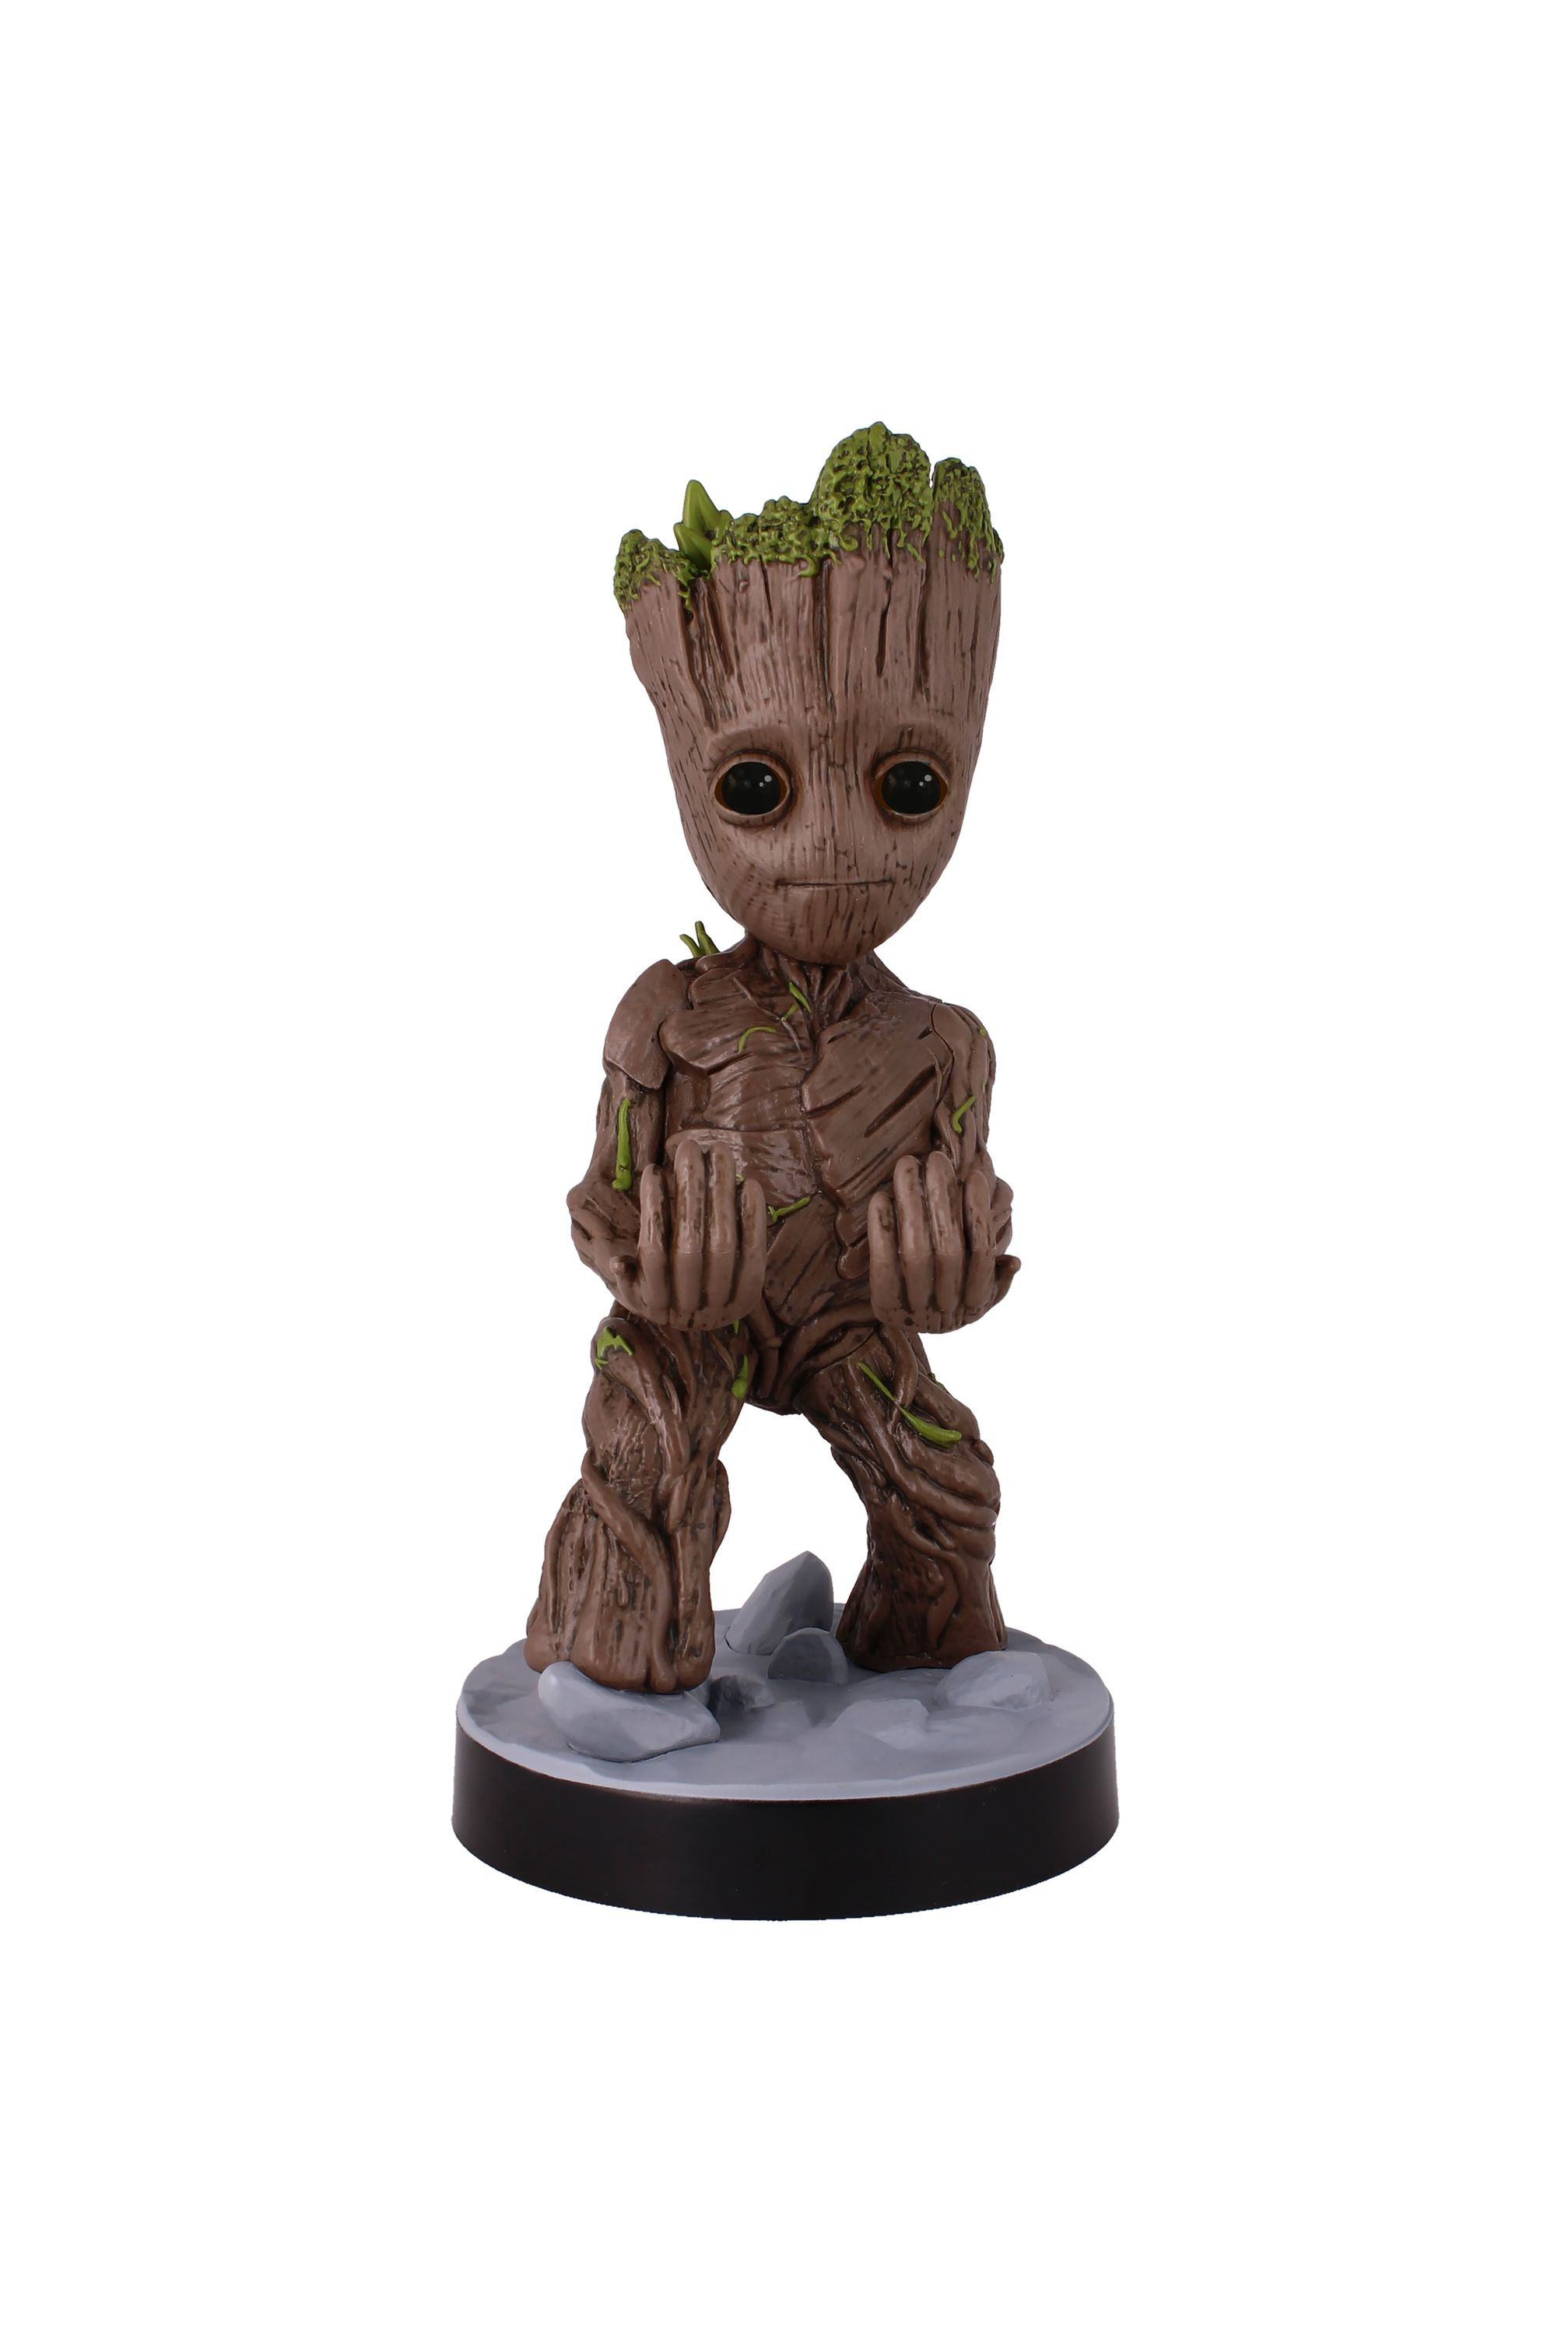 GUYS CABLE Baby Groot